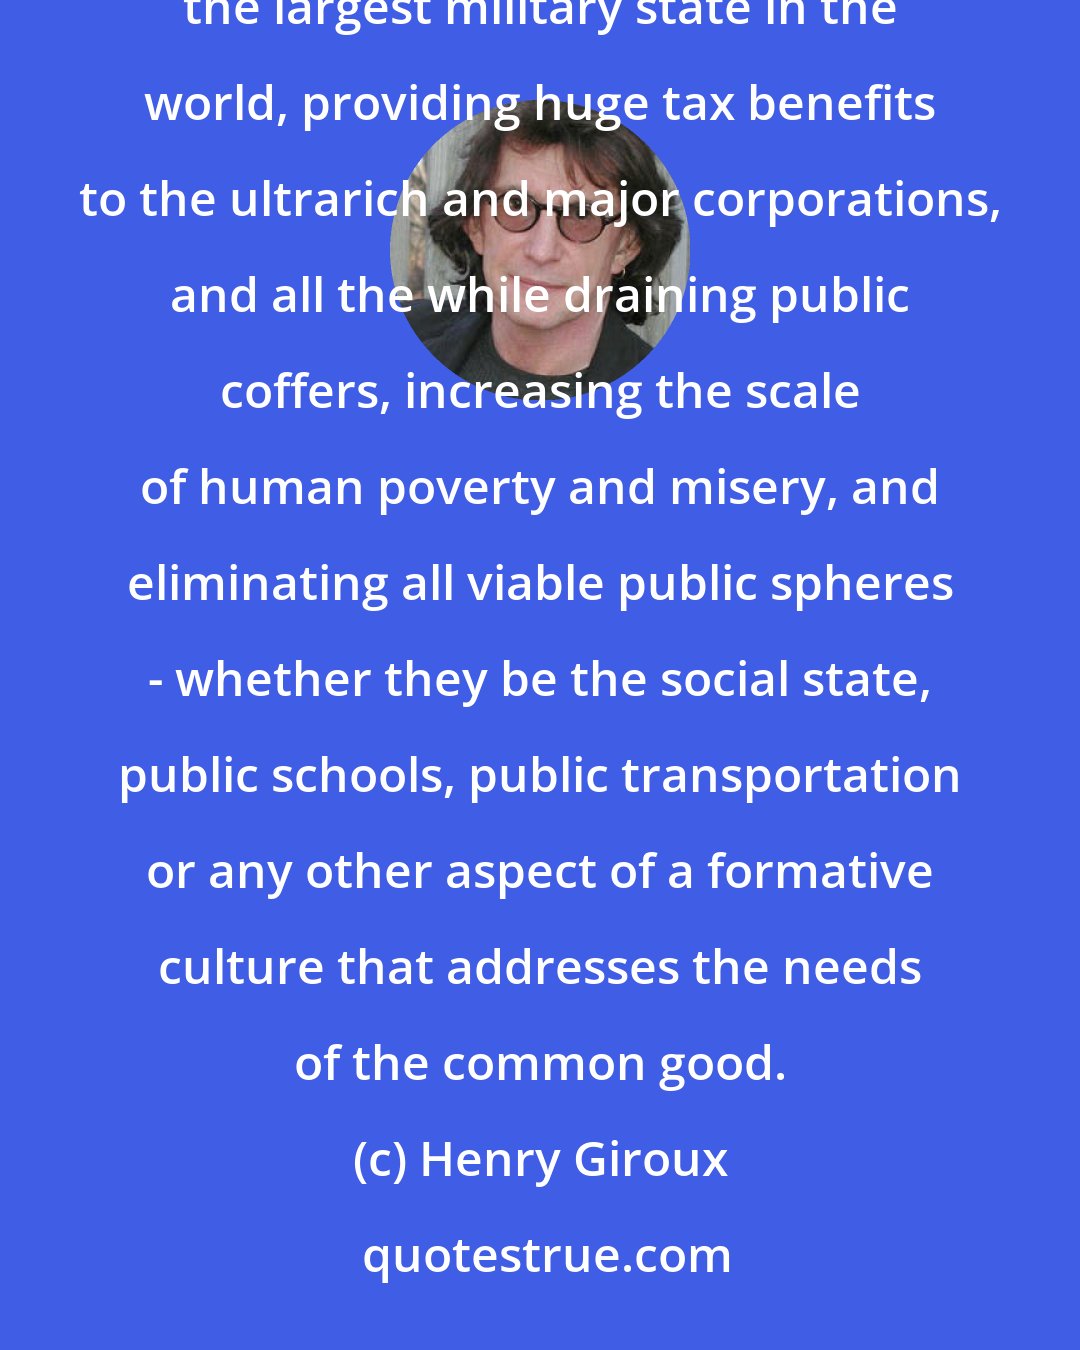 Henry Giroux: Conservative and liberal politicians alike now spend millions waging wars around the globe, funding the largest military state in the world, providing huge tax benefits to the ultrarich and major corporations, and all the while draining public coffers, increasing the scale of human poverty and misery, and eliminating all viable public spheres - whether they be the social state, public schools, public transportation or any other aspect of a formative culture that addresses the needs of the common good.